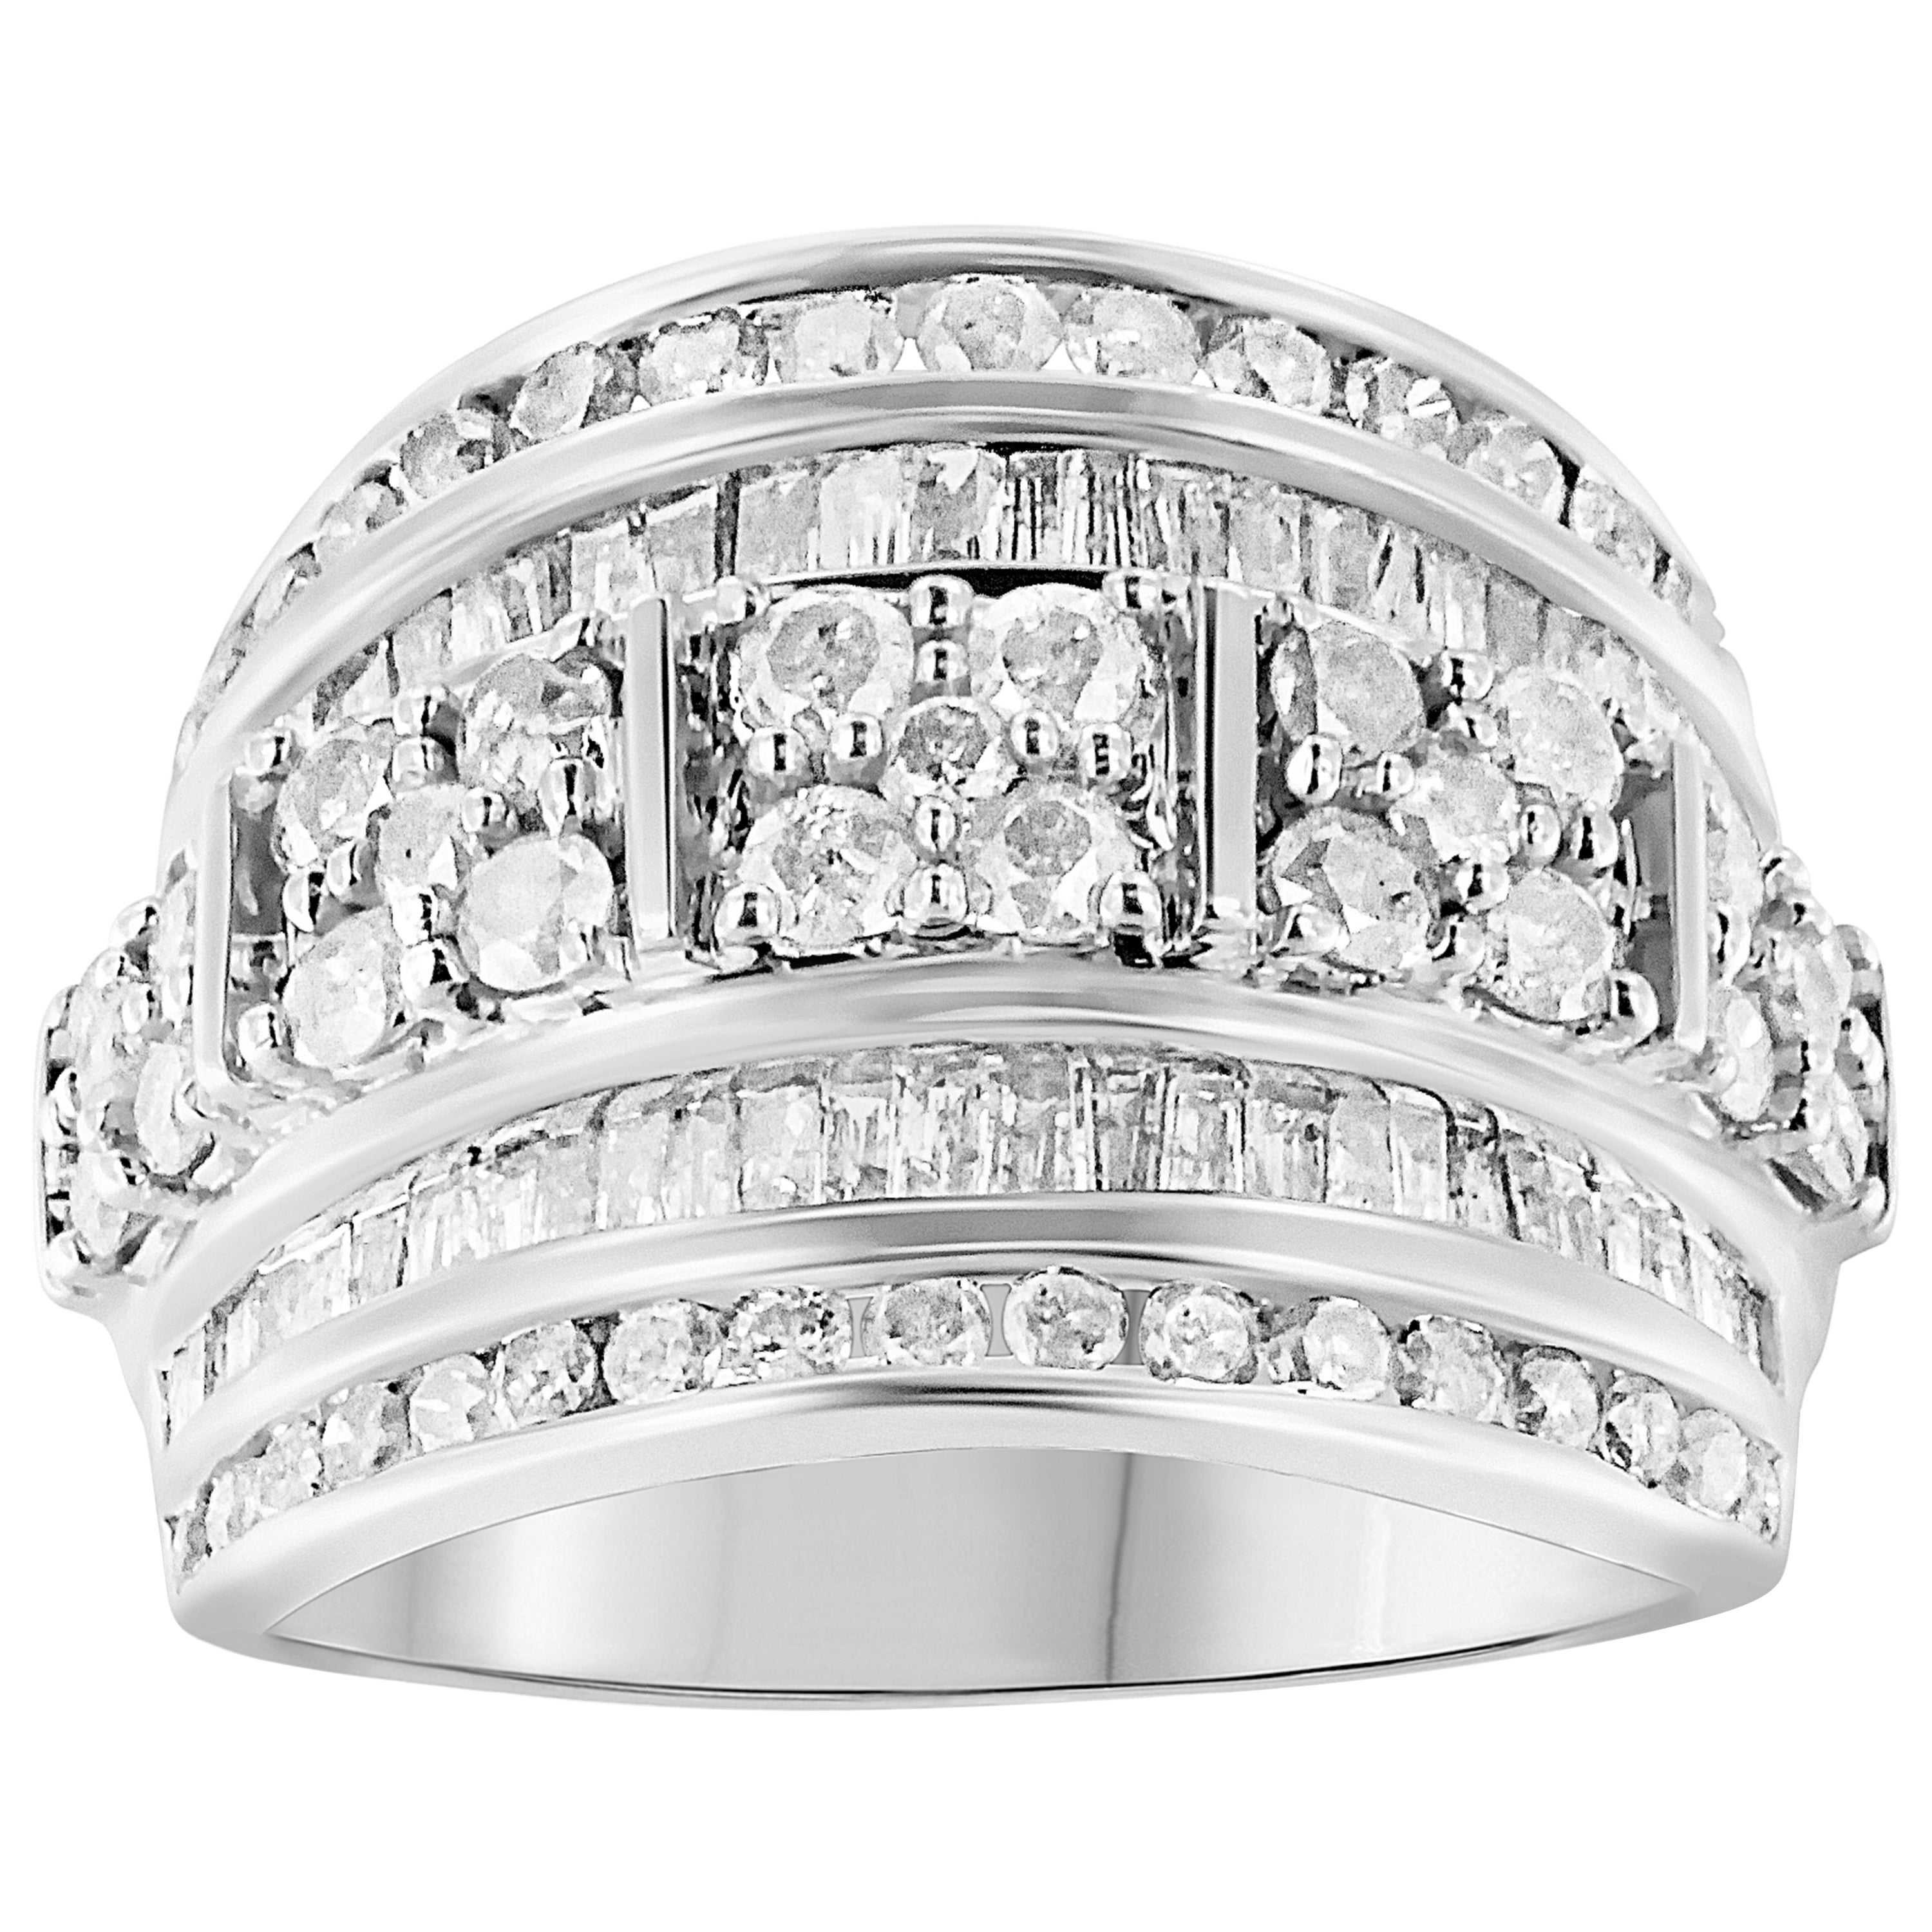 .925 Sterling Silver 2.0 Cttw Diamond Multi-Row Tapered Cocktail Ring en vente